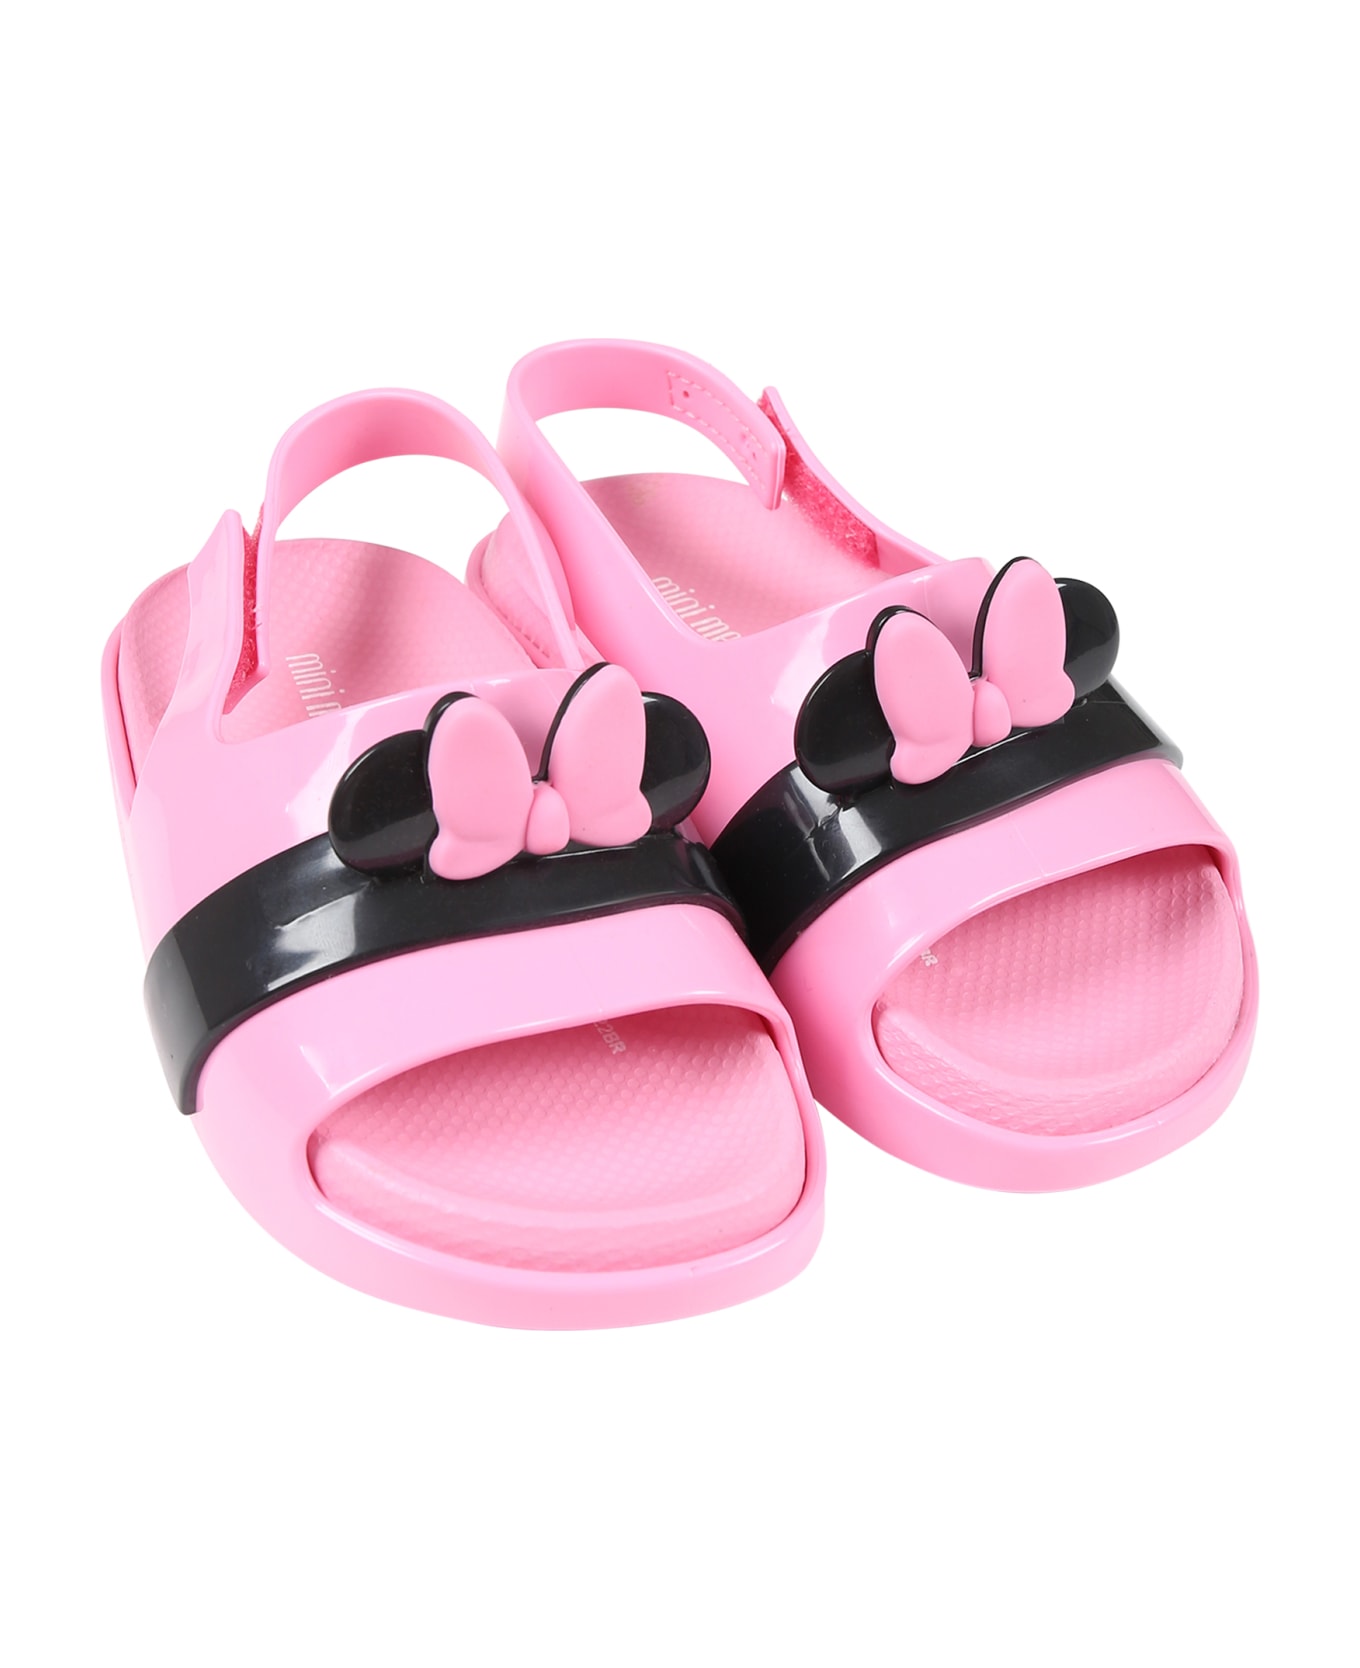 Melissa Pink Sandals For Girl With Minnie Ears - Pink シューズ